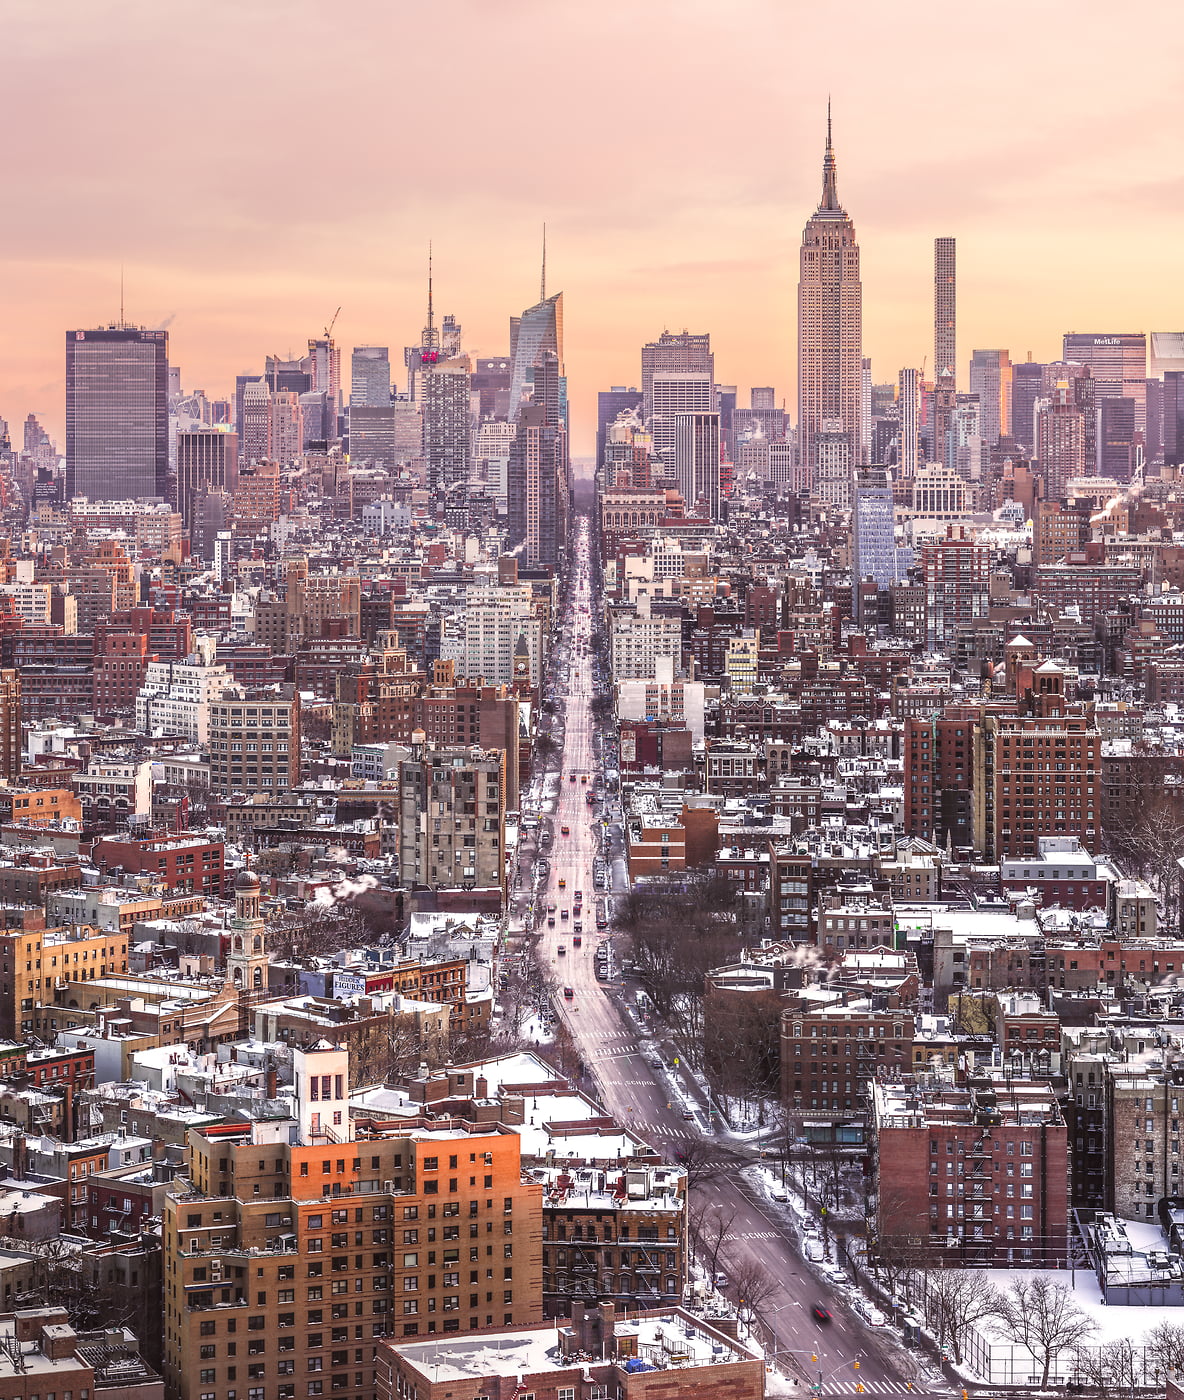 477 megapixels! A very high resolution, large-format VAST photo print of the NYC skyline in winter snow; cityscape sunrise fine art photo created by Dan Piech in New York City